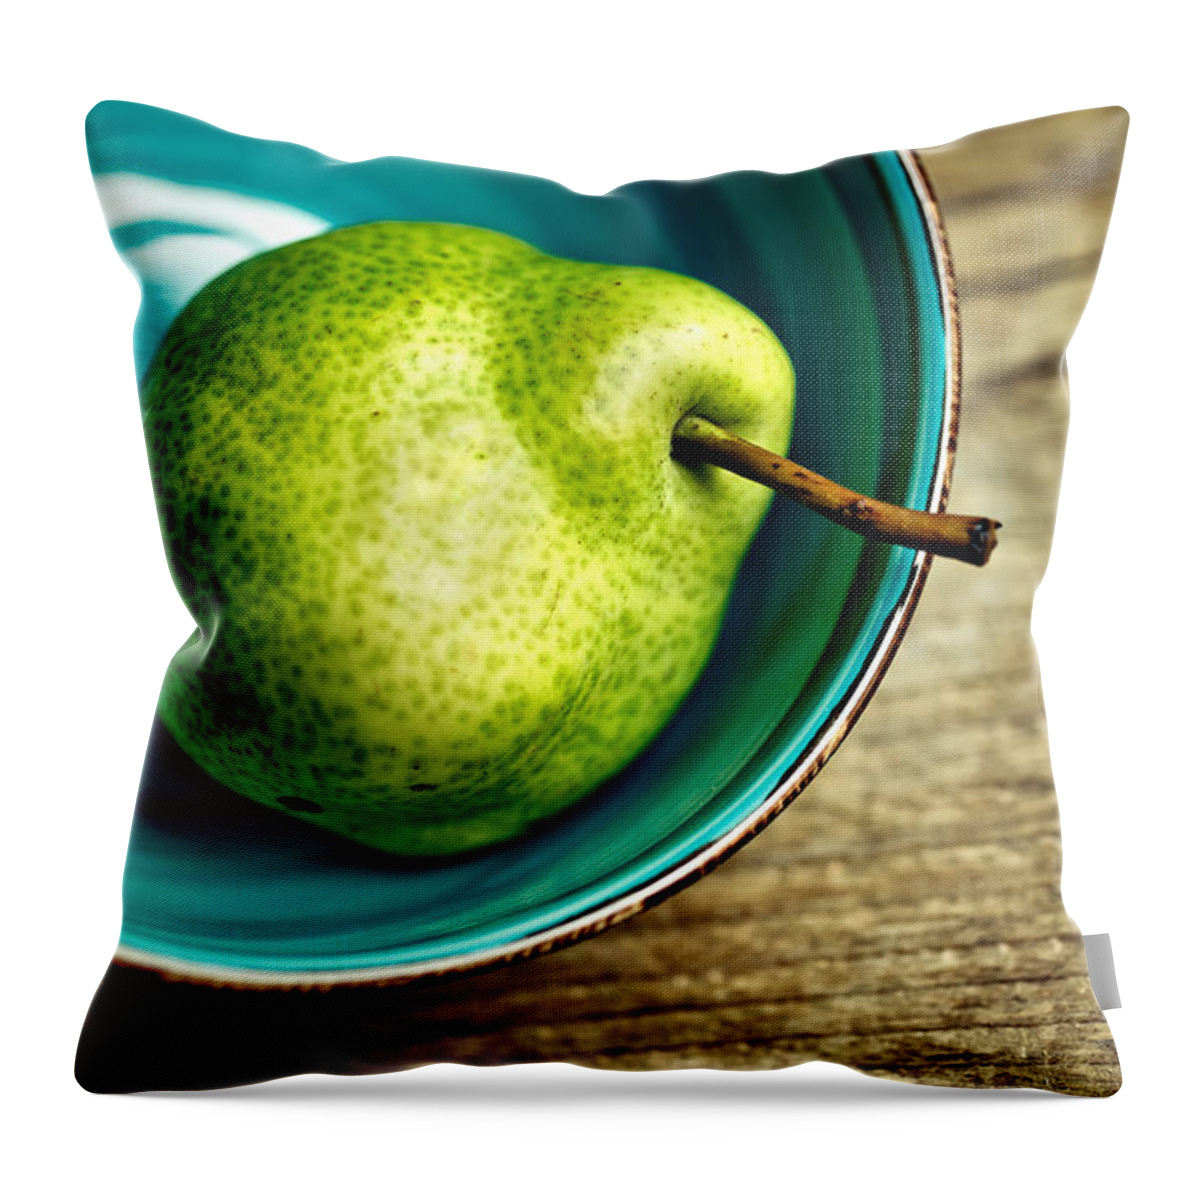 Pear; Pears; Fruit; Ripe; Juicy; Fruits; Group; Many; Row; Heap; Whole; Stoneware; Bowl; Blue Throw Pillow featuring the photograph Pears by Nailia Schwarz